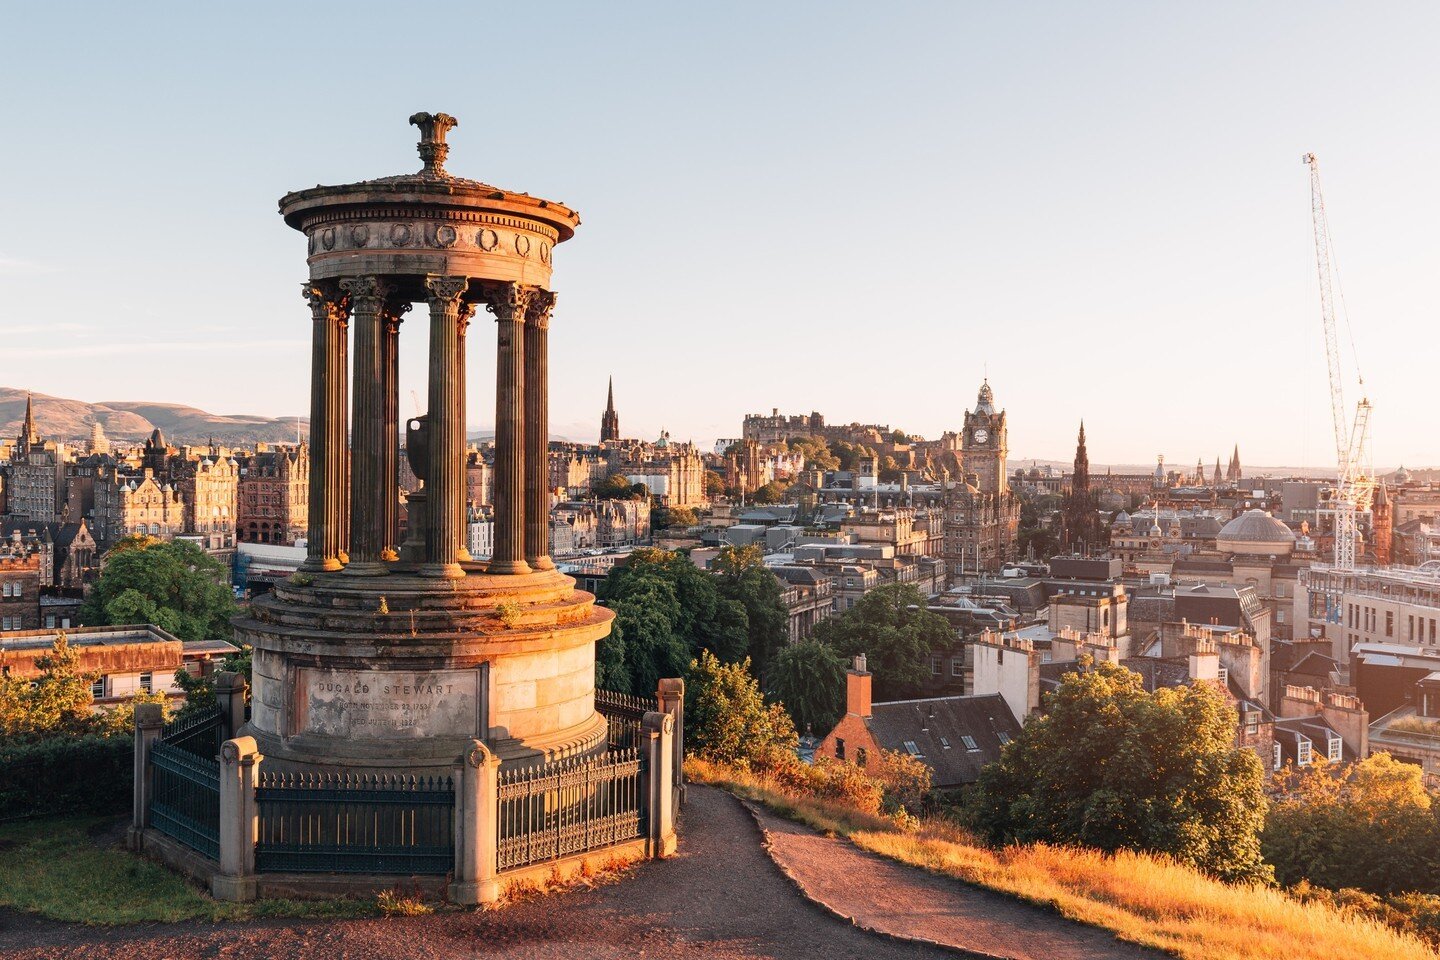 Marked as a UNESCO World Heritage Site, Calton Hill has some of the city's best views and if you get up early &ndash;&ndash; the best sunrises. 🌅⁠
⁠
Calton Hill is also resident to some of Scotland's most iconic monuments and buildings: National Mon